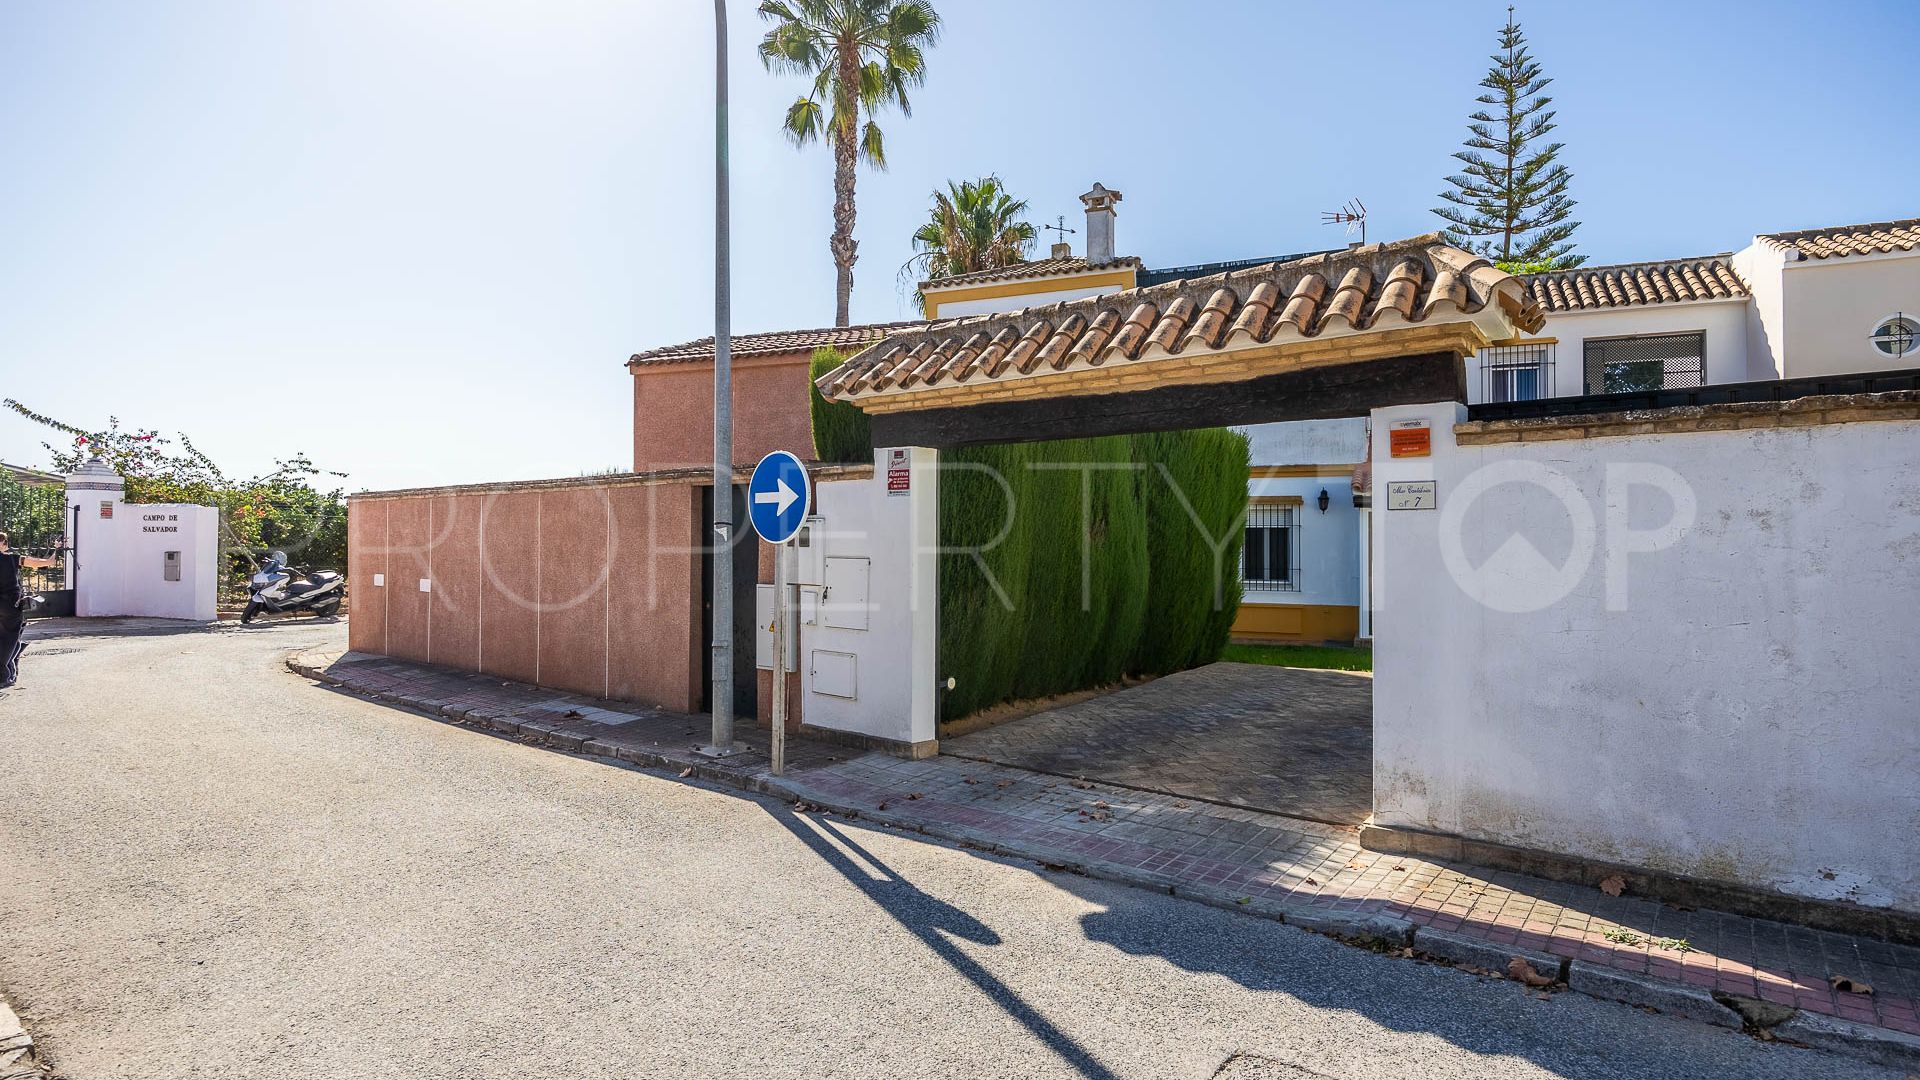 For sale semi detached house with 5 bedrooms in Sanlucar la Mayor